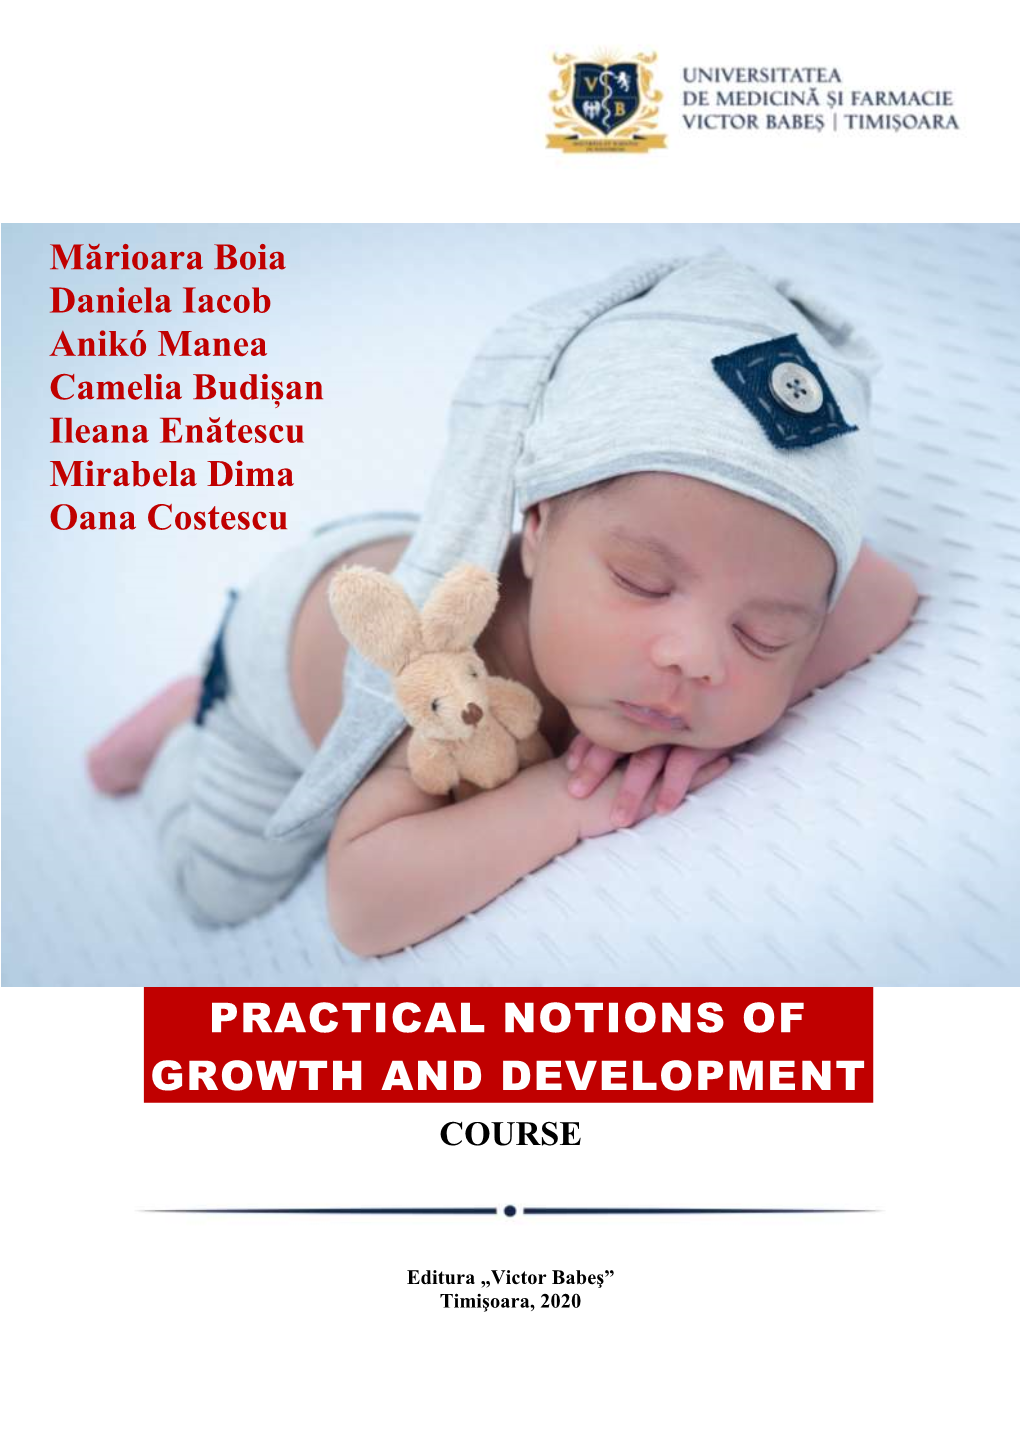 Practical Notions of Growth and Development Course